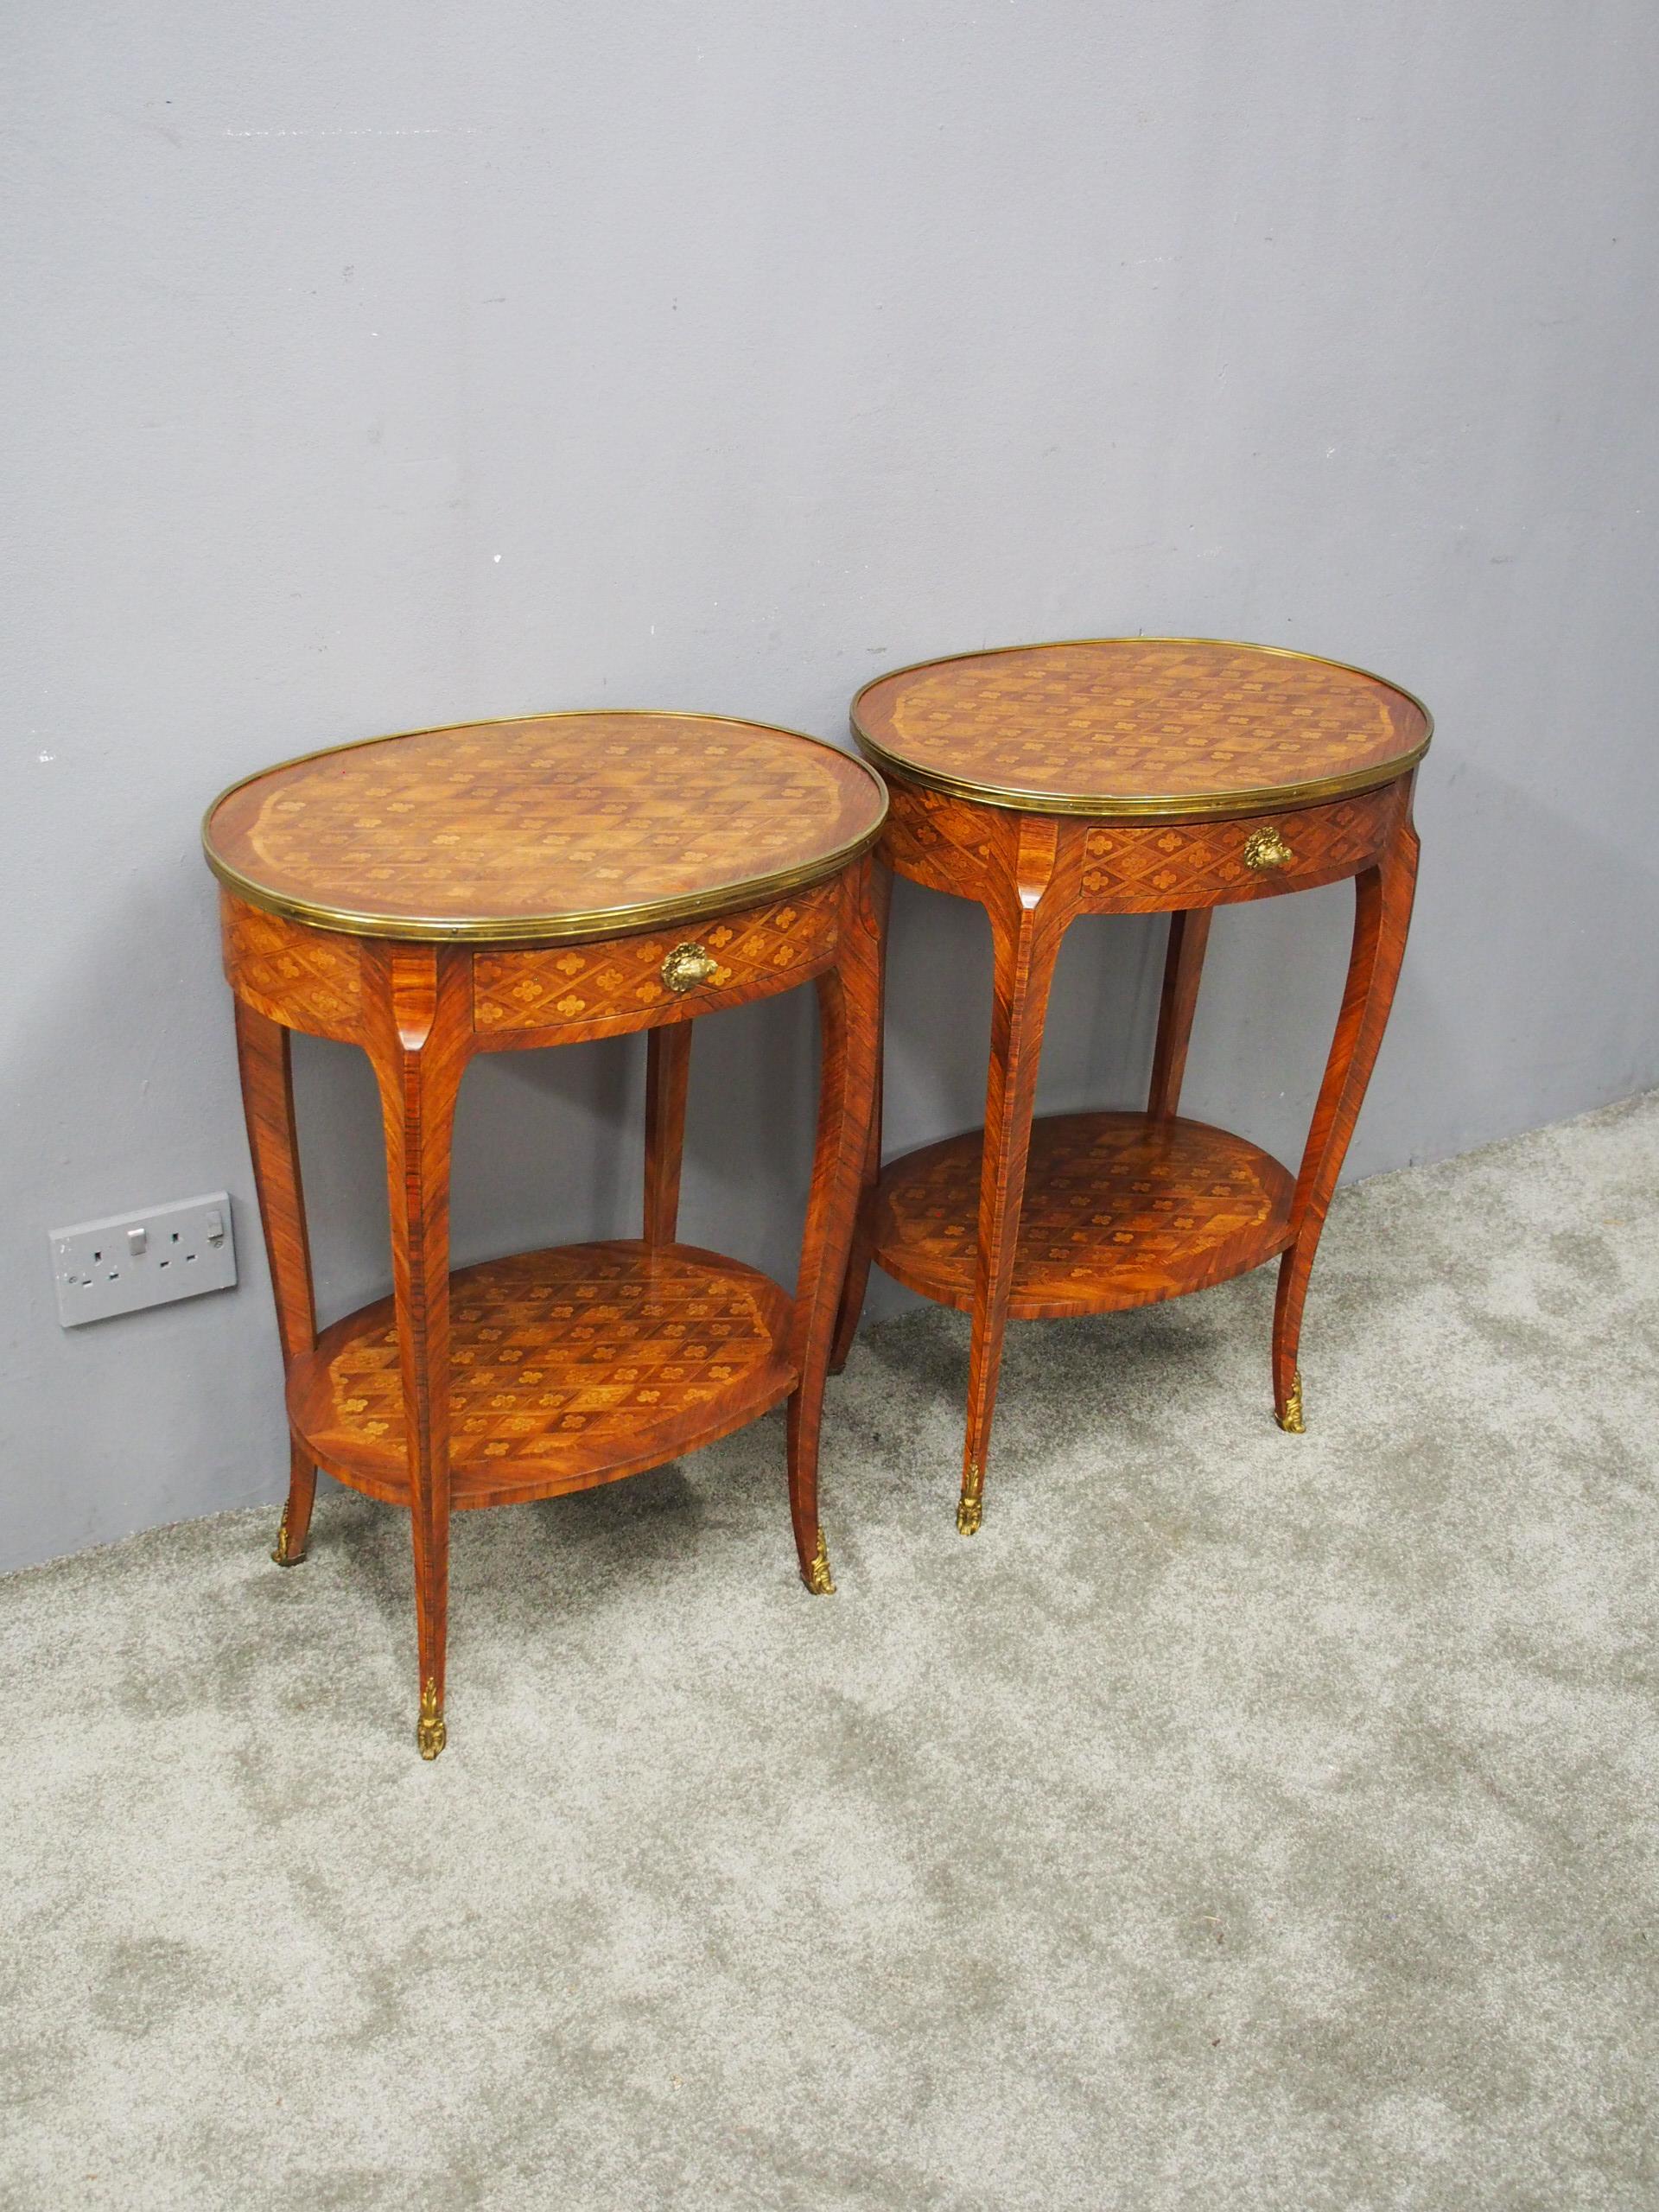 Pair of French oval marquetry and parquetry kingwood occasional tables, circa 1880. The oval shaped tables have a shaped brass band with a crossbanding of parquetry, and inlaid top panel. Beneath the top is one bow fronted drawer with similar inlay